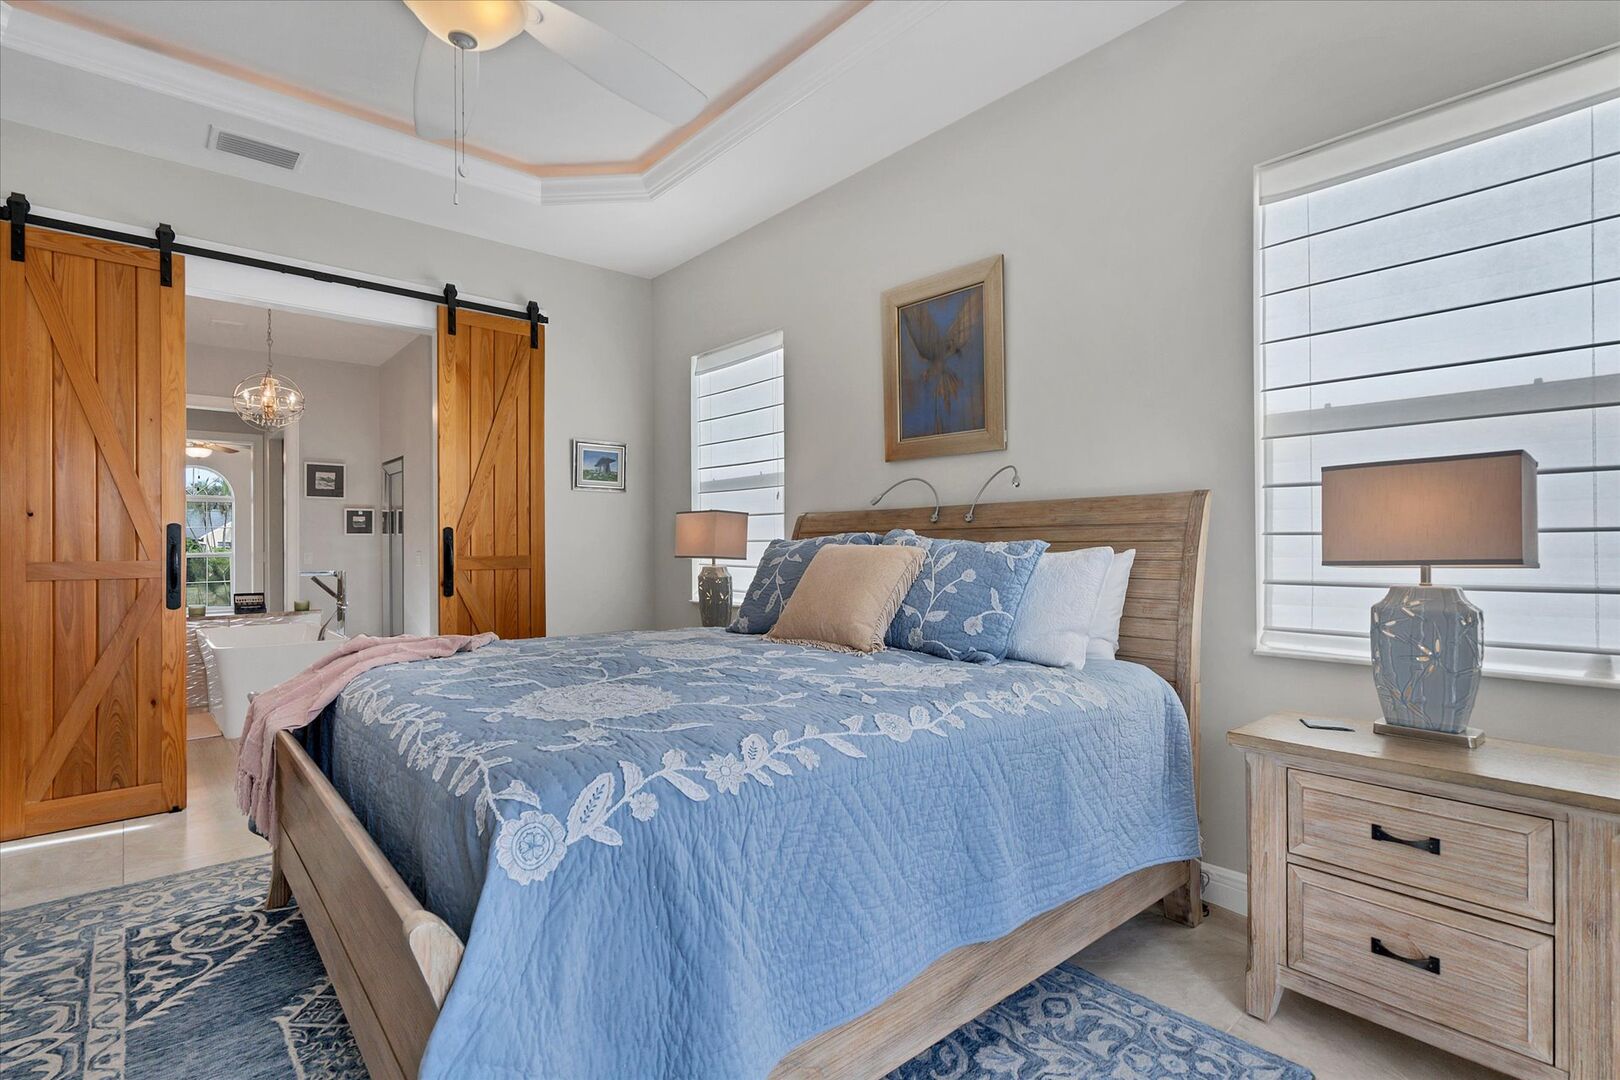 Primary bedroom featuring king bed, lanai doors and gorgeous barn doors leading to ensuite